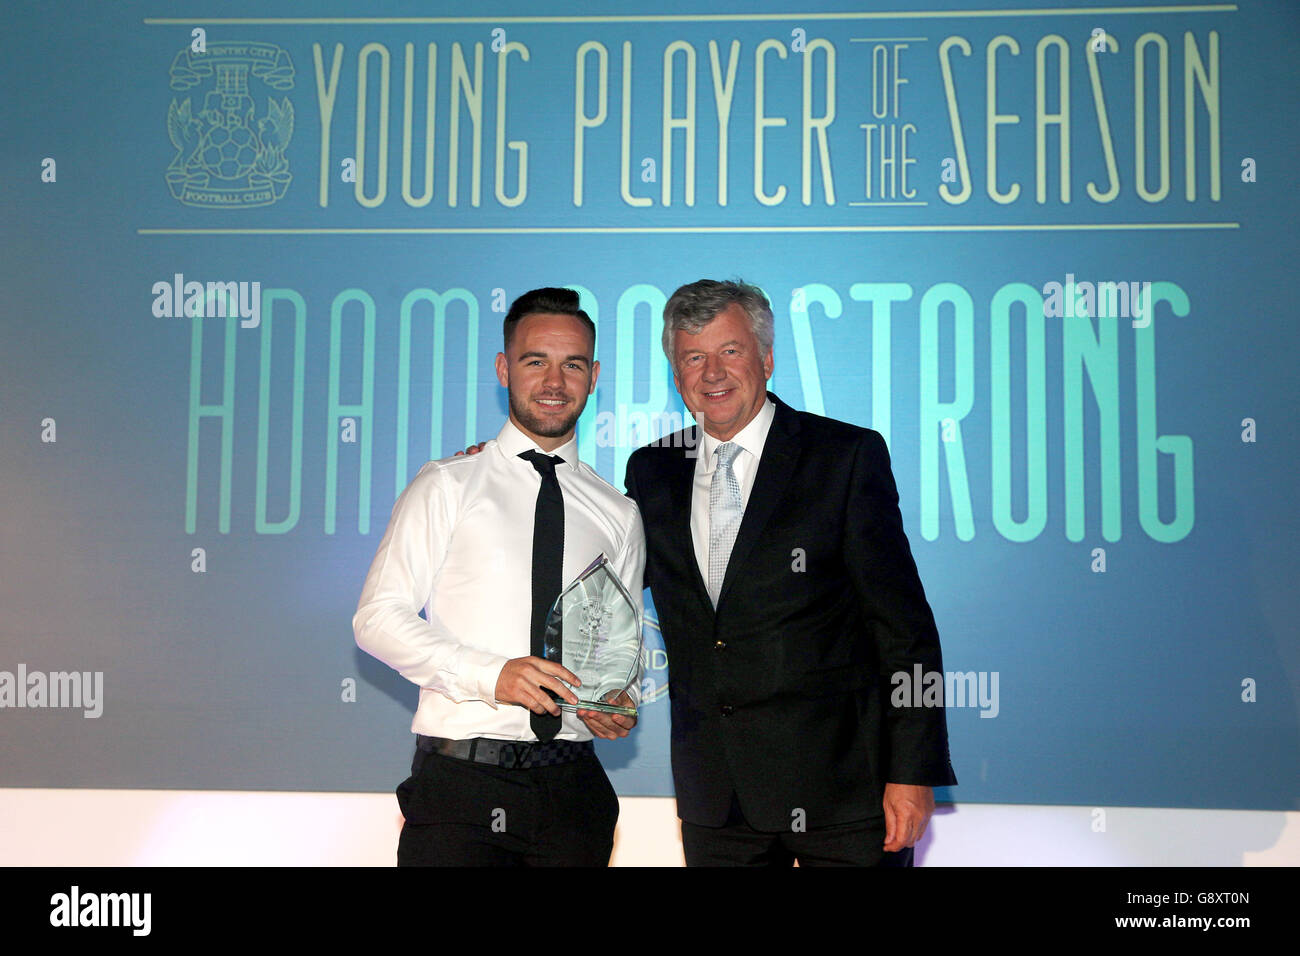 Coventry City End of Season Awards Evening. Coventry City's Adam Armstrong receives the Young Player of the Season award Stock Photo